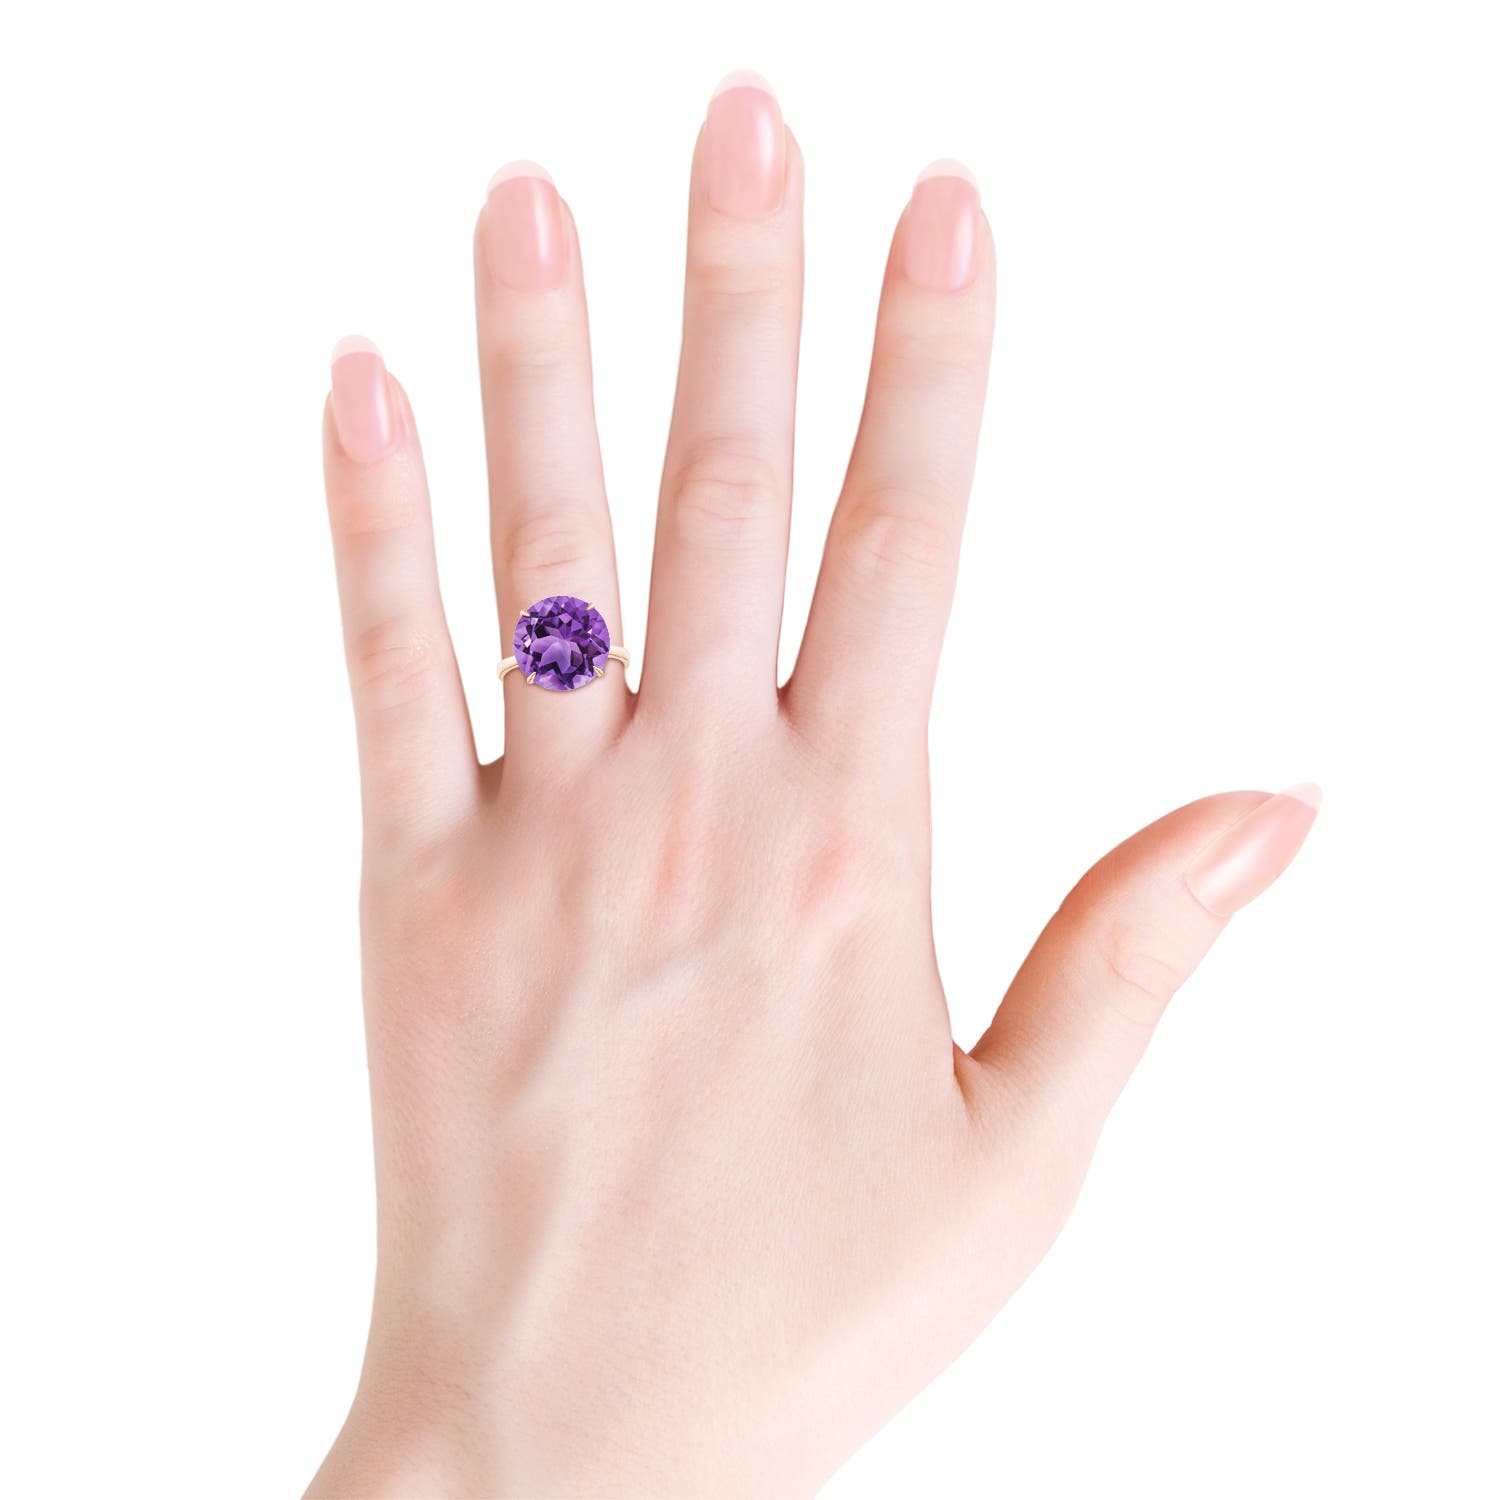 AA- Amethyst / 7.2 CT / 14 KT Rose Gold